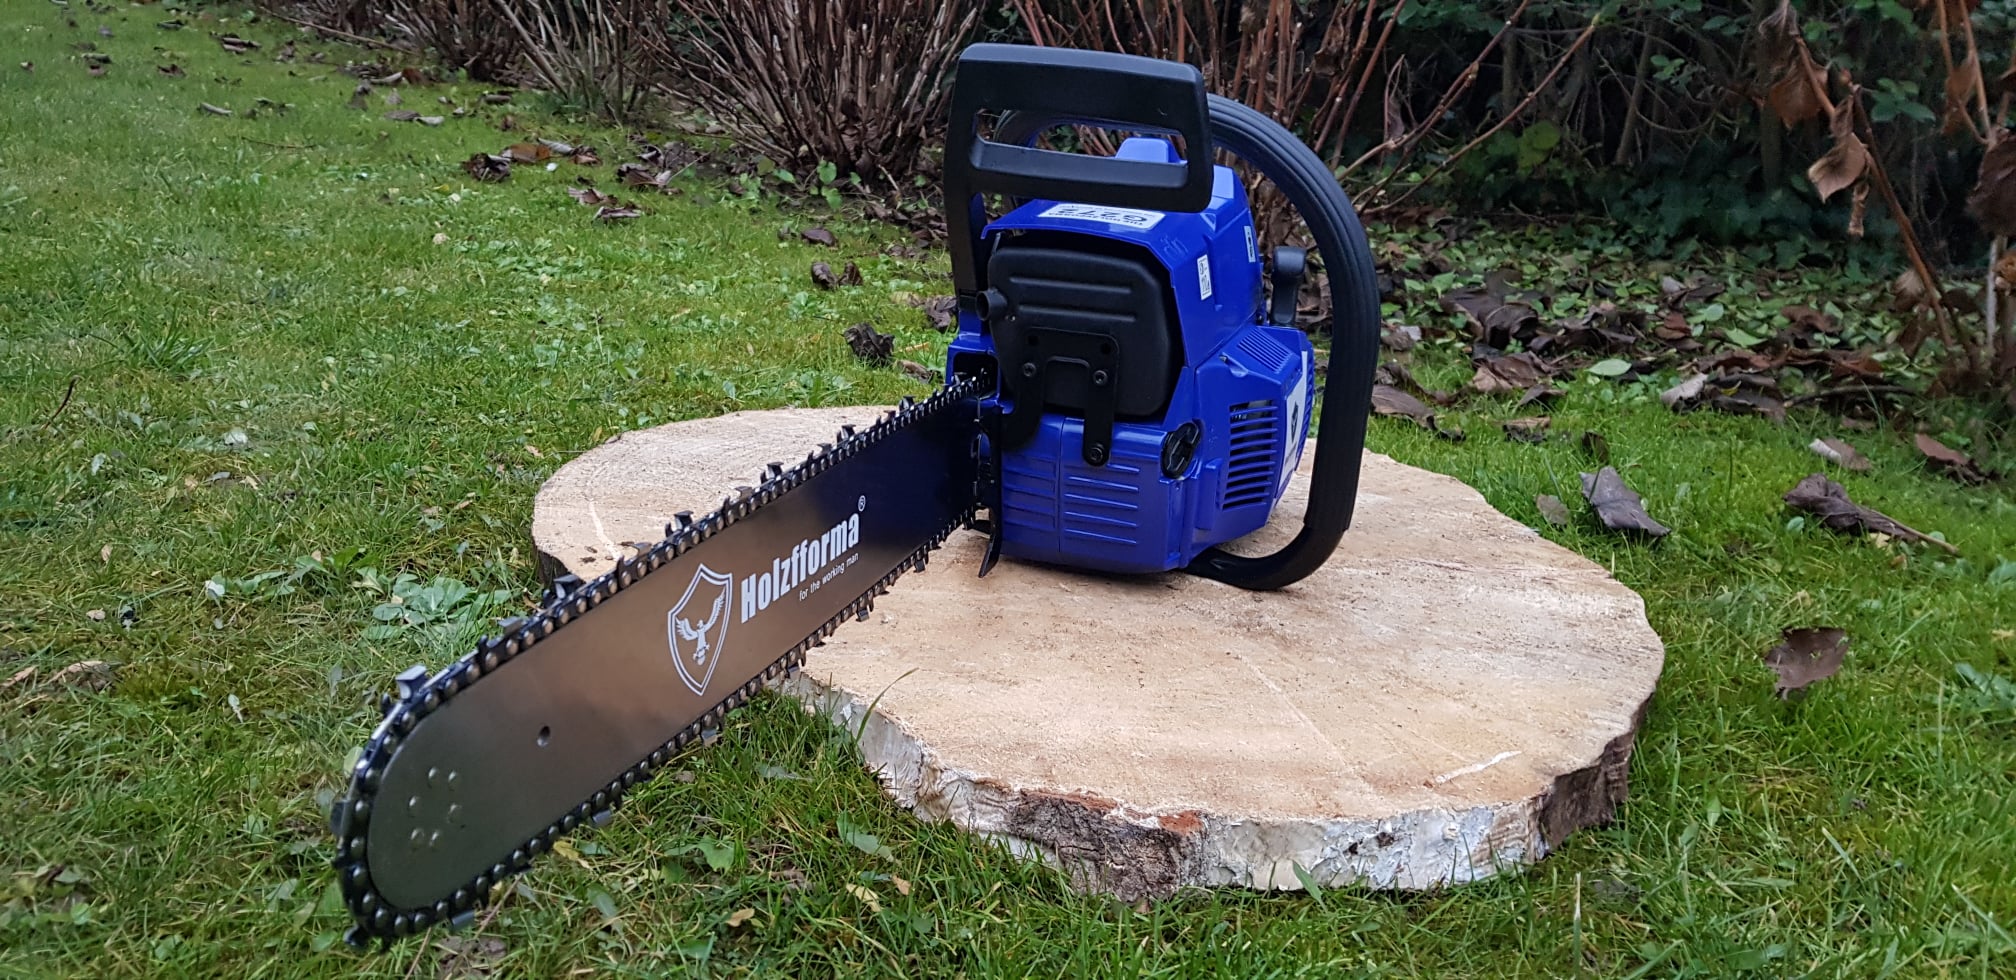 best holzfforma chainsaw review